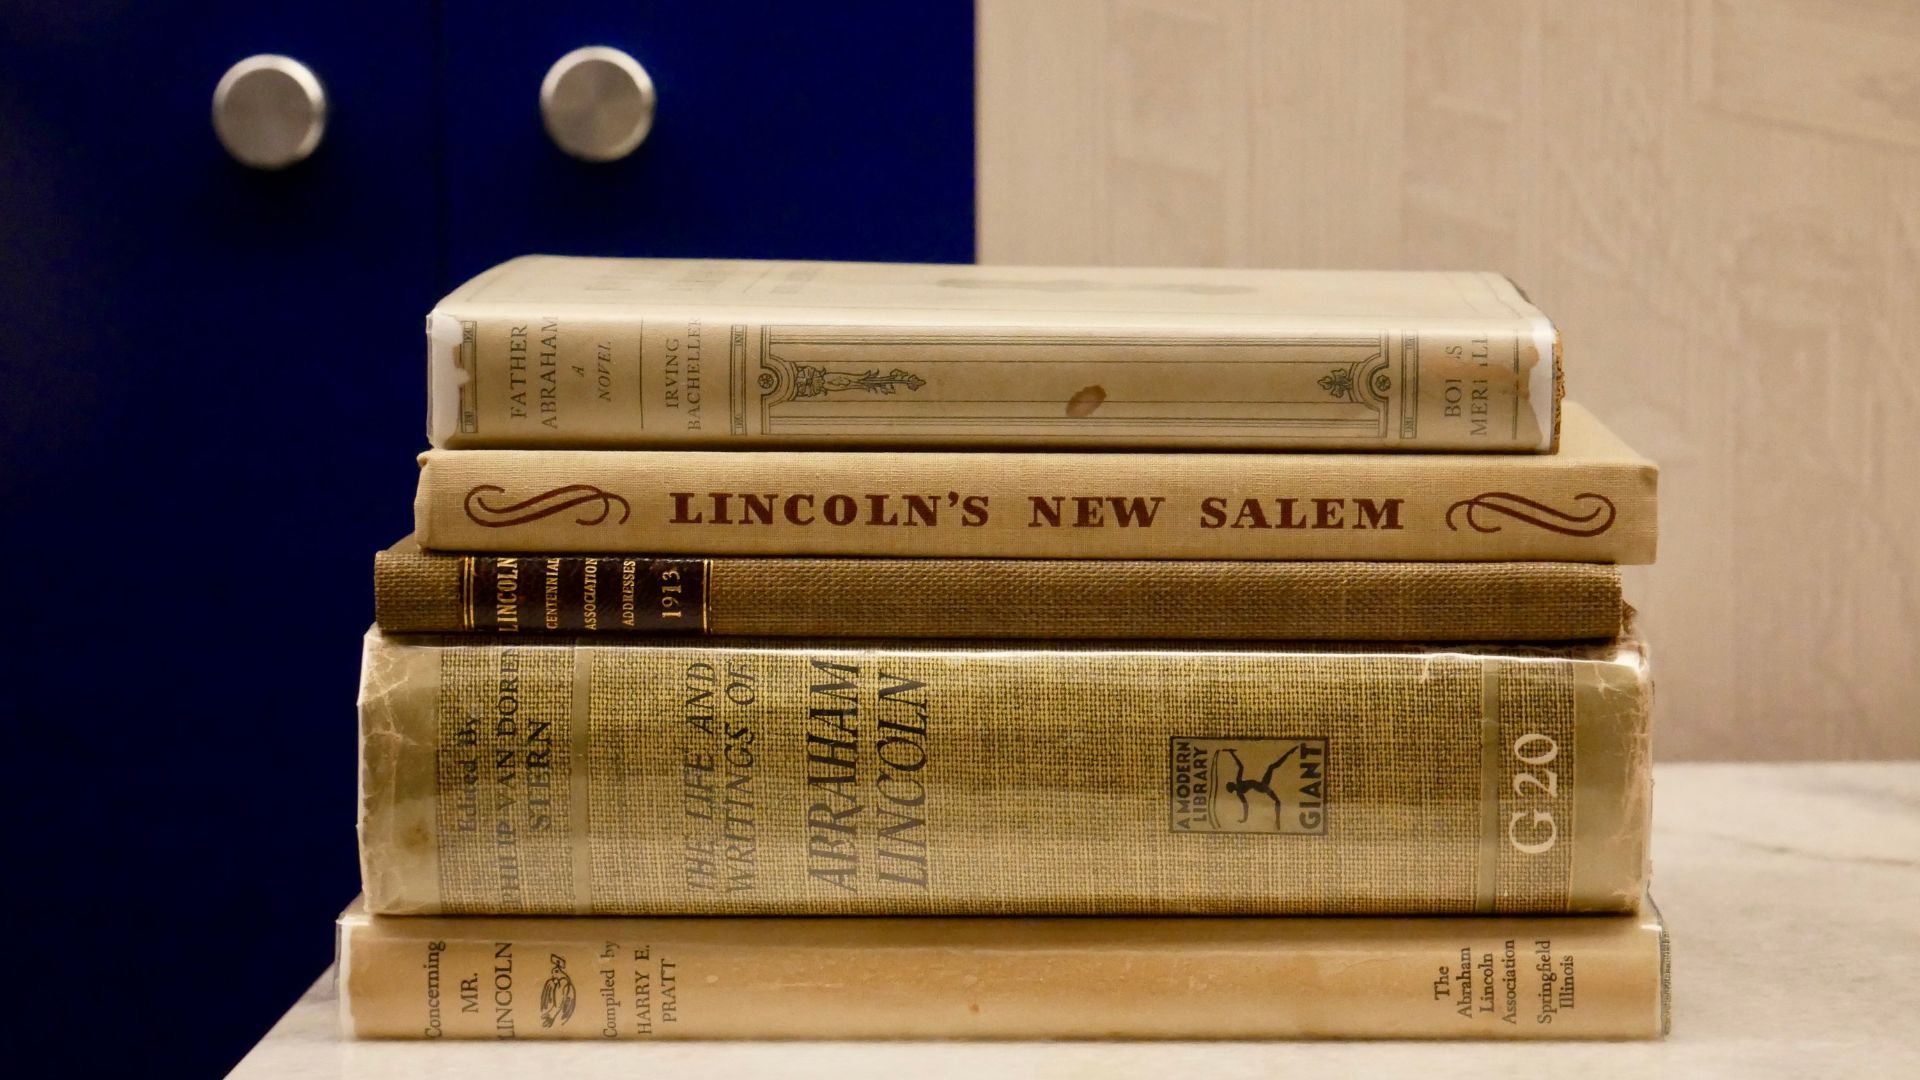 Books from the American Civil War on view at a museum in St. Louis.